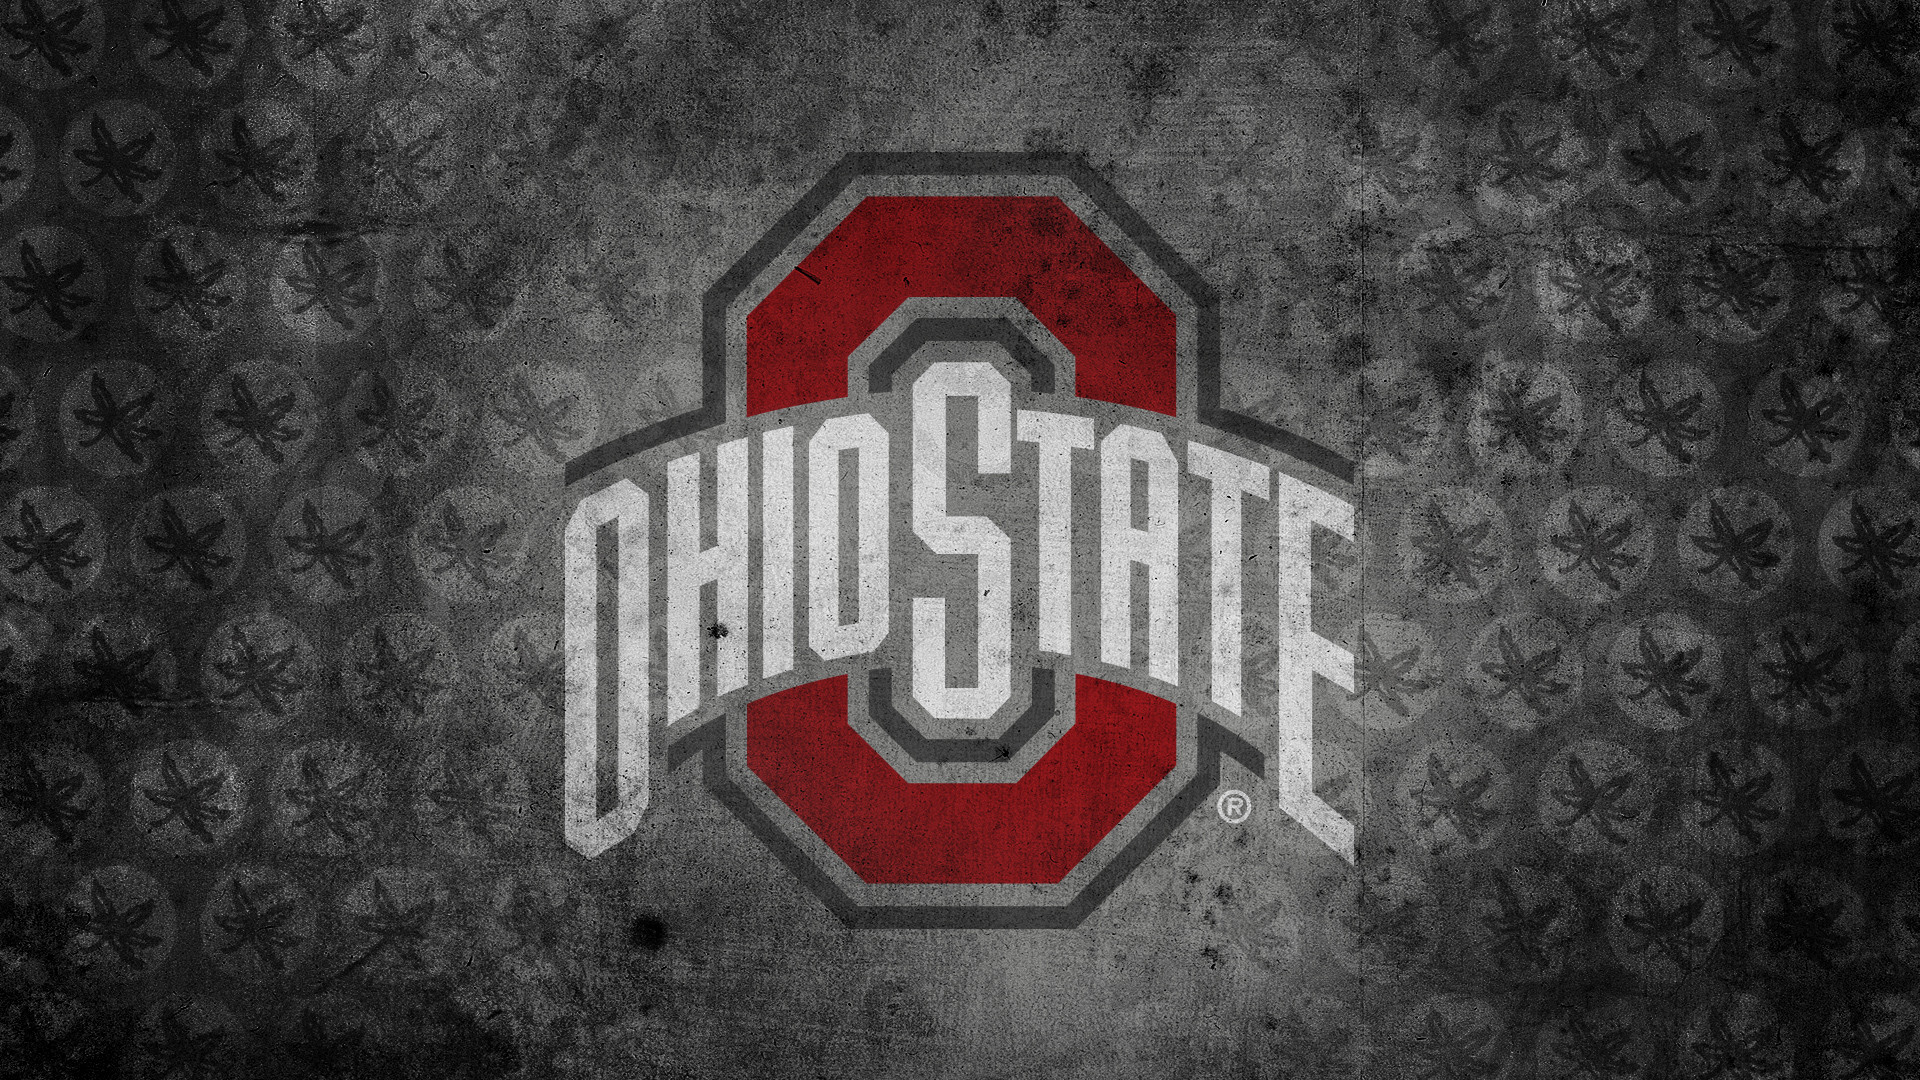 1920x1080 ... Ohio State Wallpaper 2015 1080p by Salvationalizm